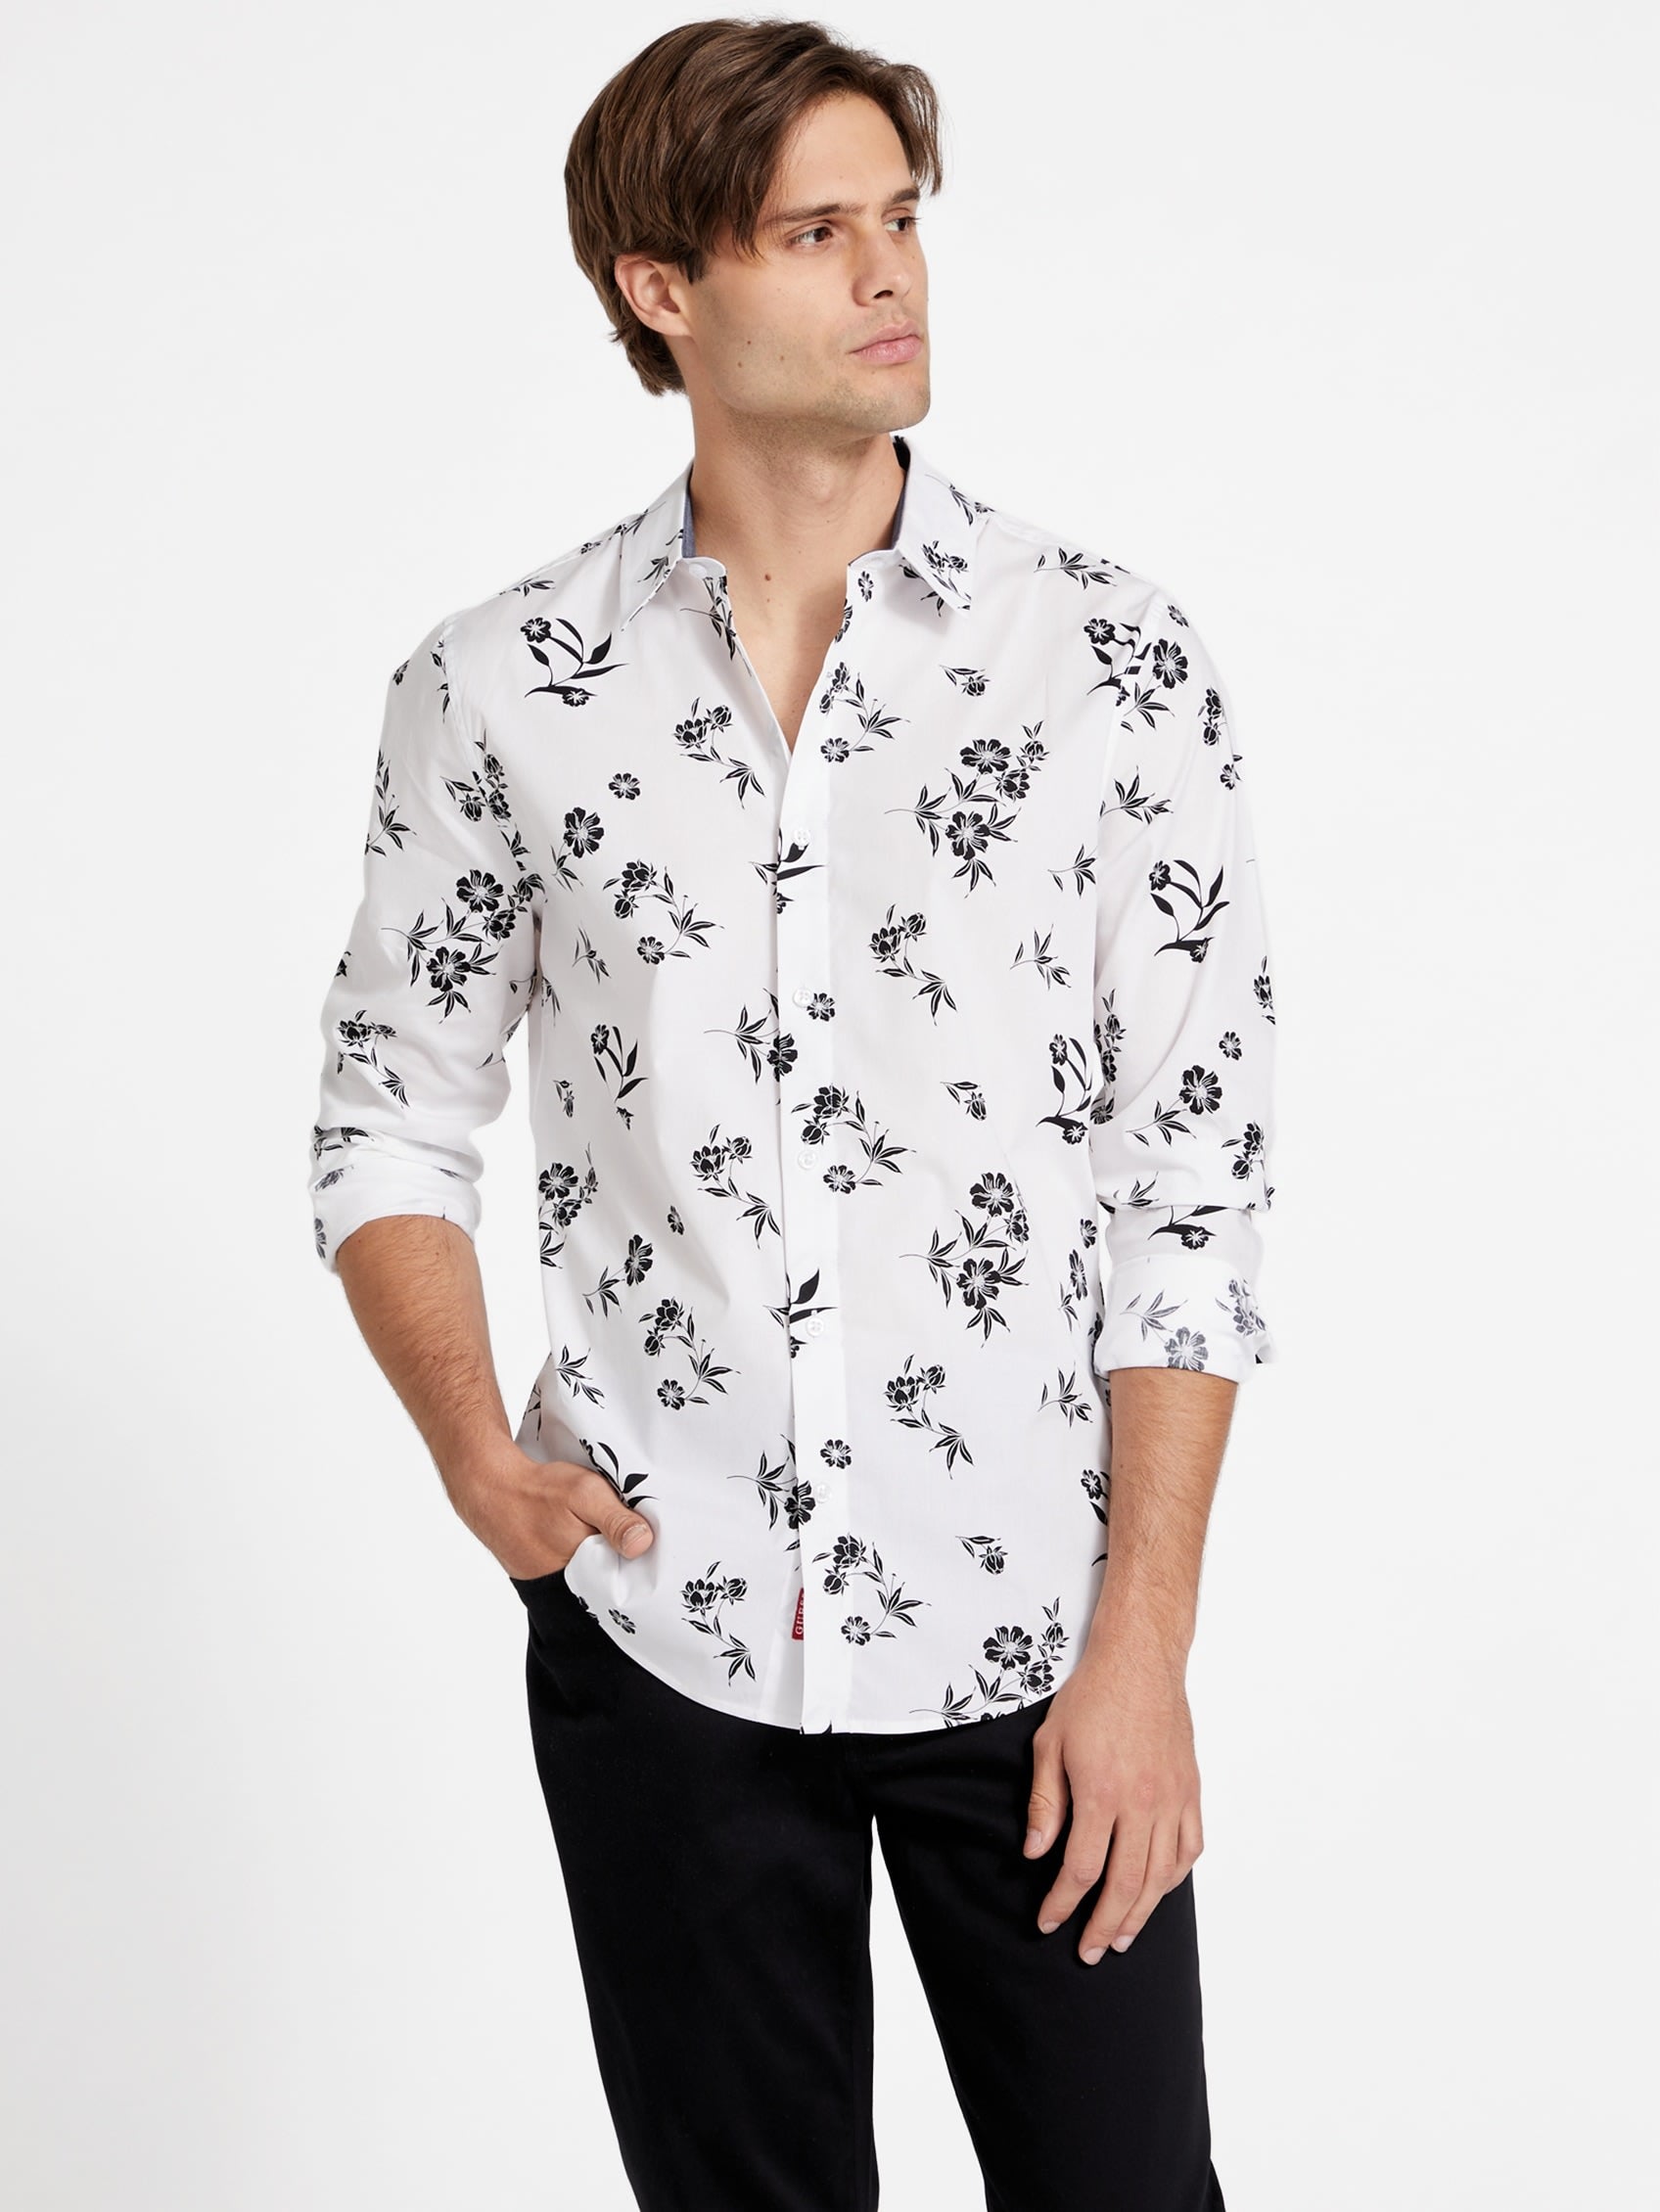 Guess Factory Tilly Floral Poplin Shirt In White